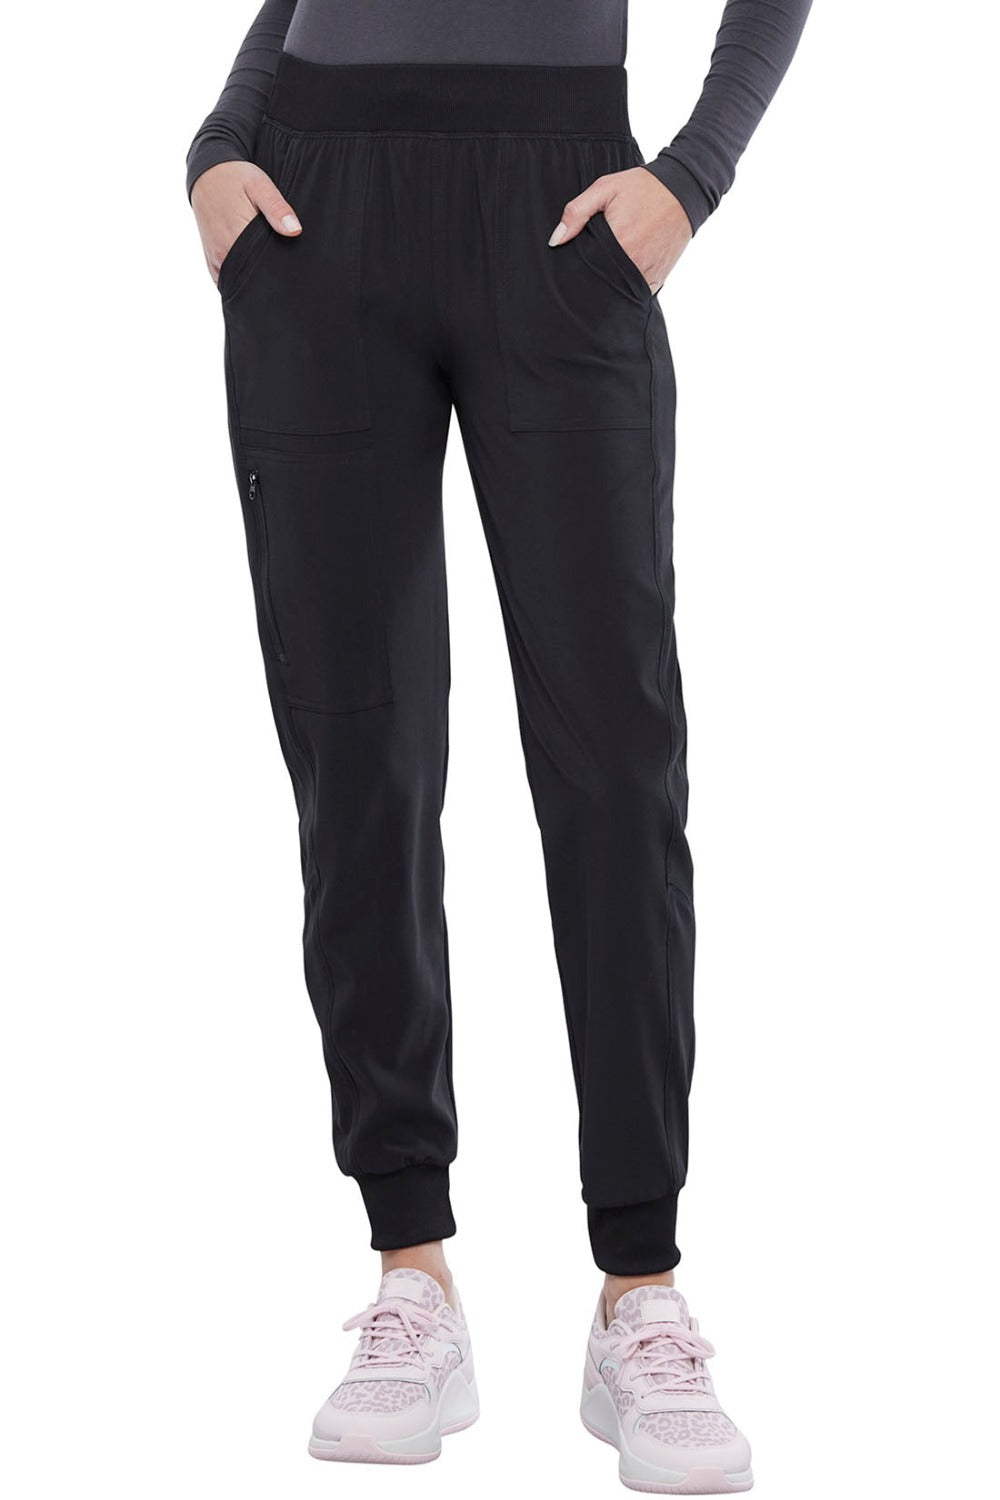 Cherokee Allura Petite Scrub Pant Pull On Jogger in Black at Parker's Clothing and Shoes.